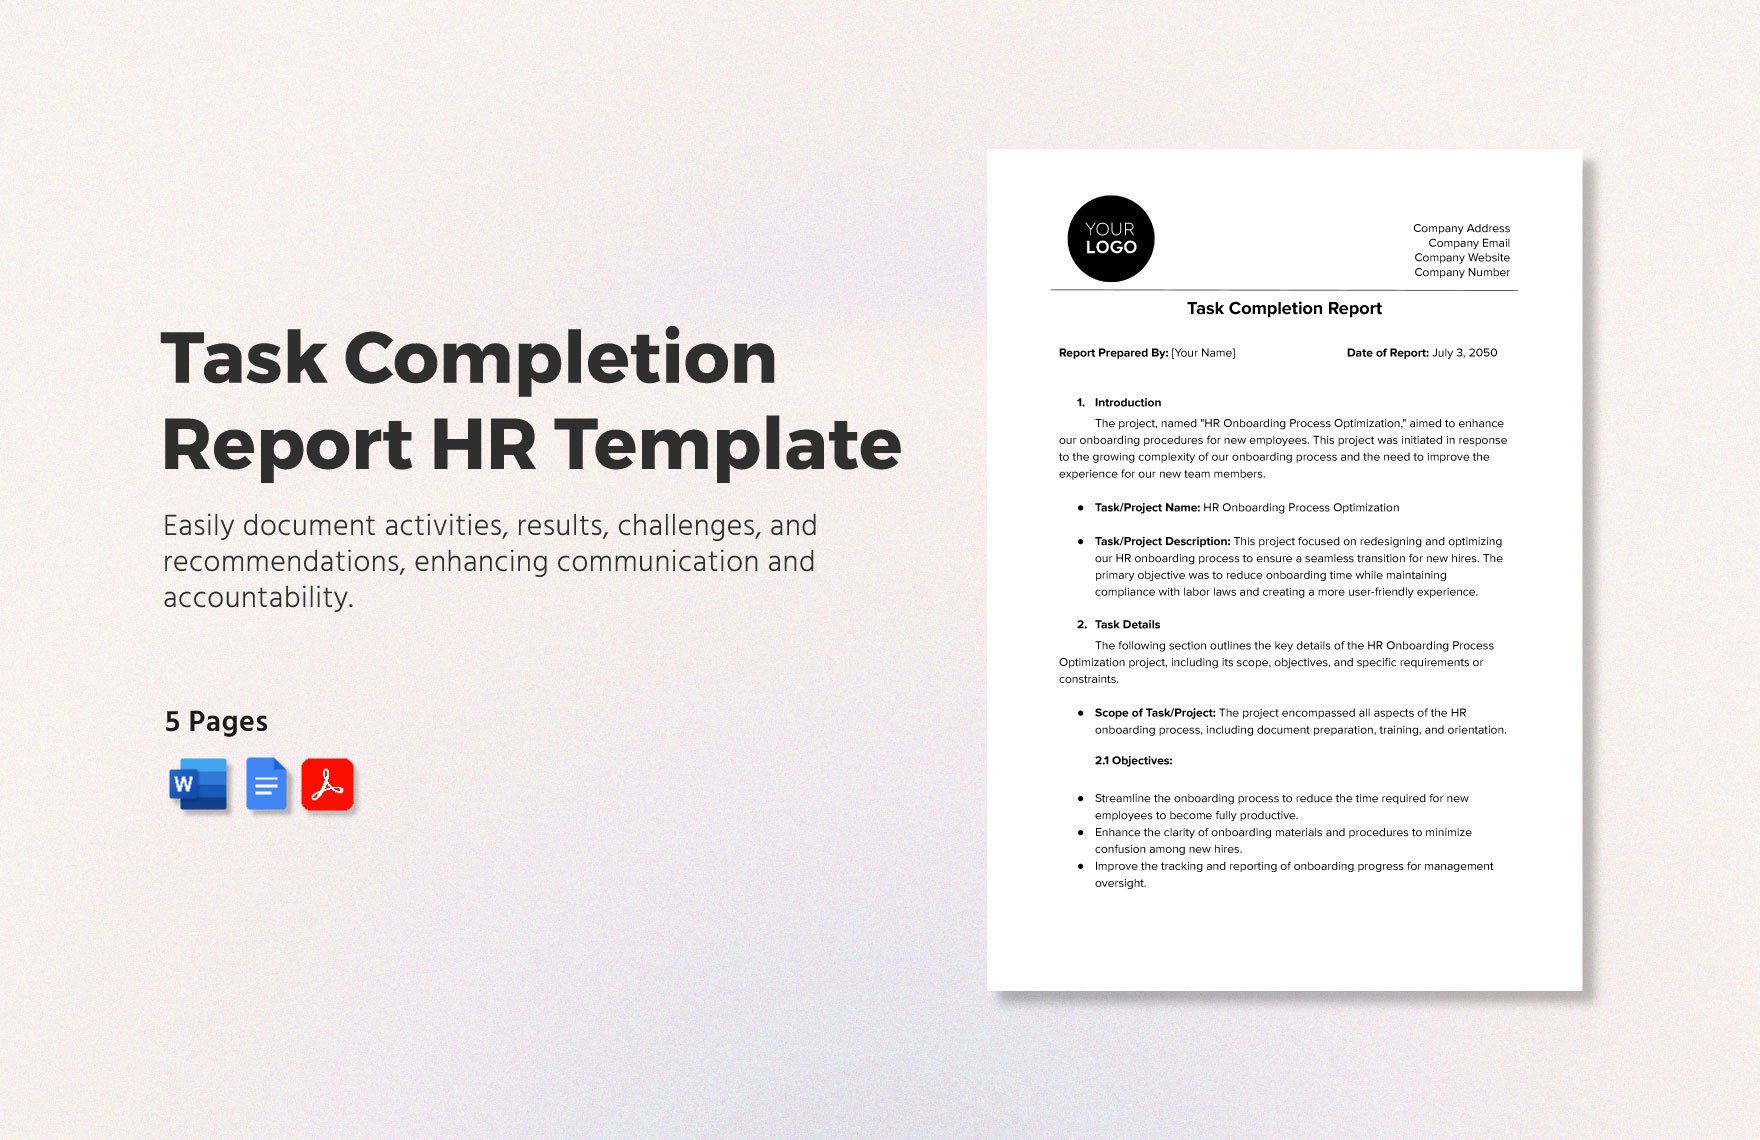 Task Completion Report HR Template in Word, Google Docs, PDF